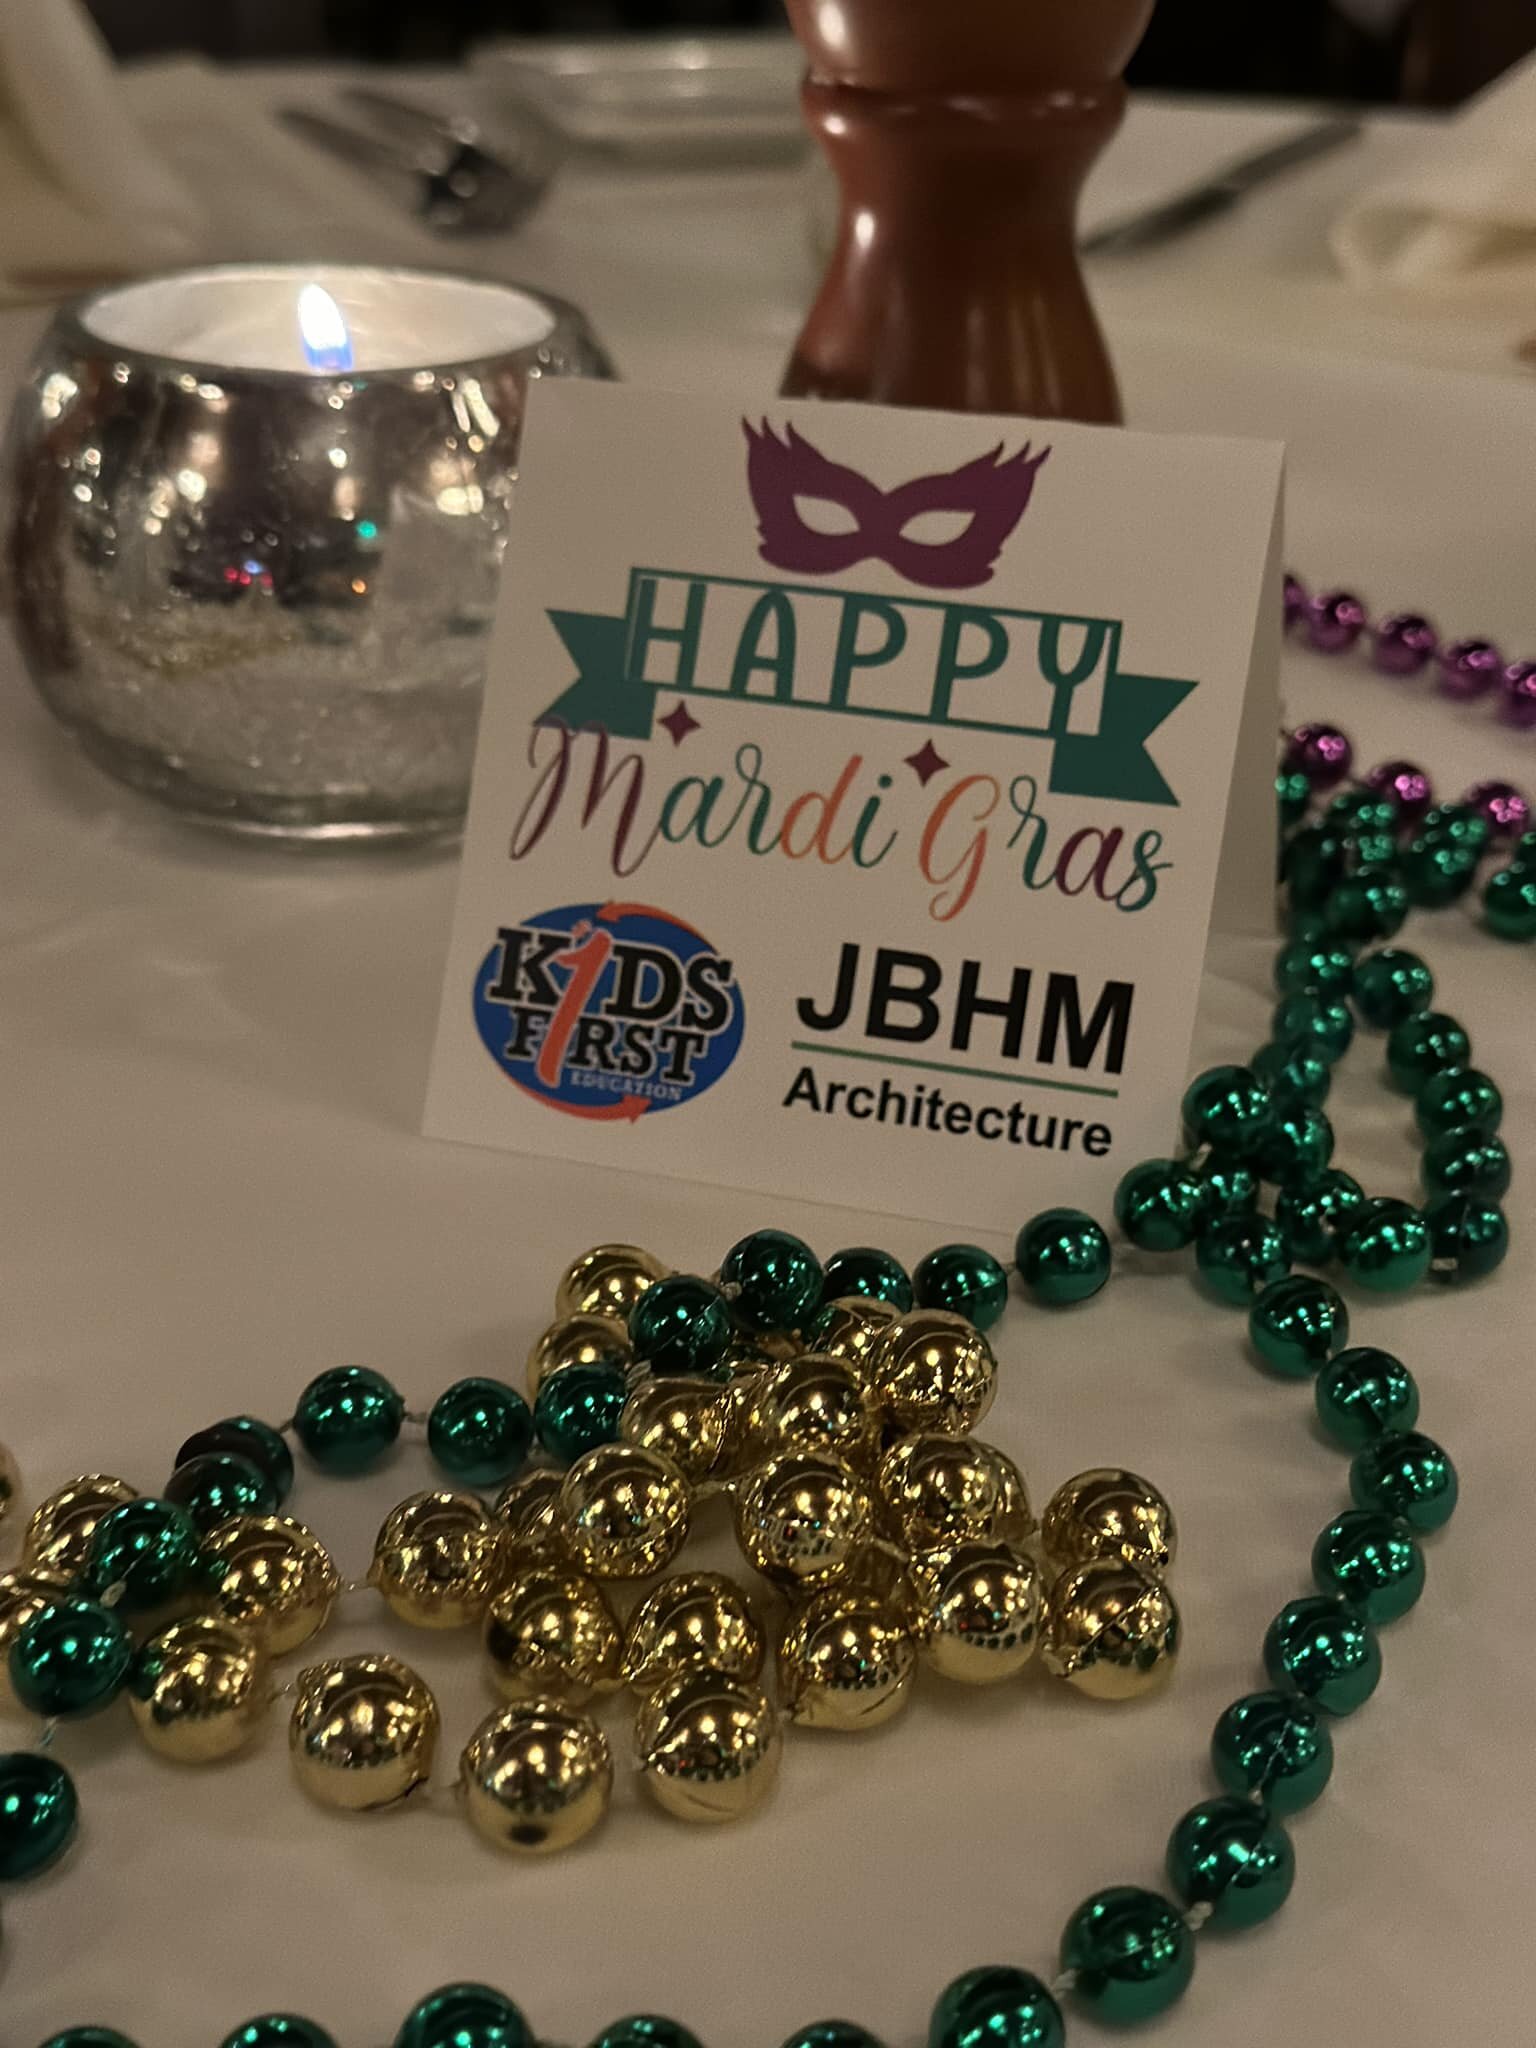 Happy Mardi Gras from JBHM Architecture &amp; Kids First Education!